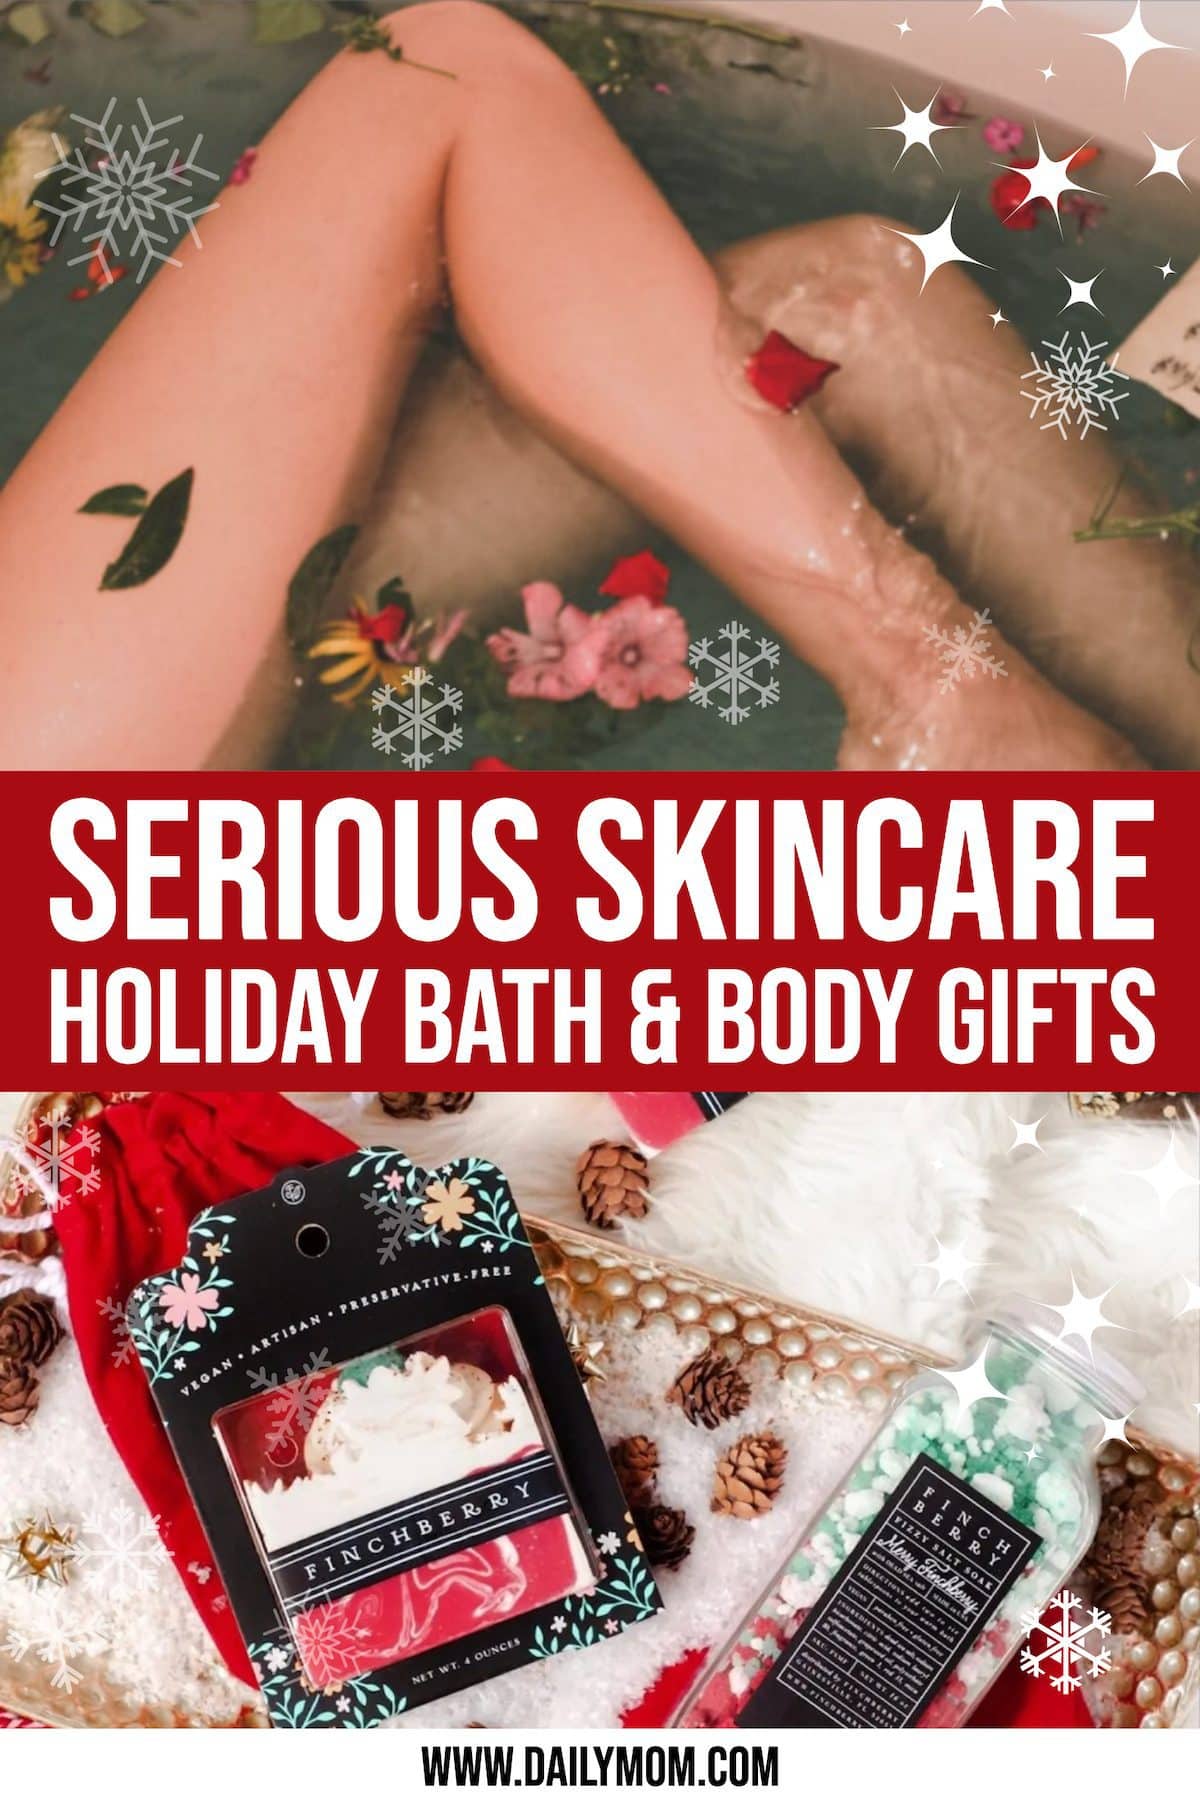 15 Bath & Body Gifts For The Serious Skincare Enthusiast